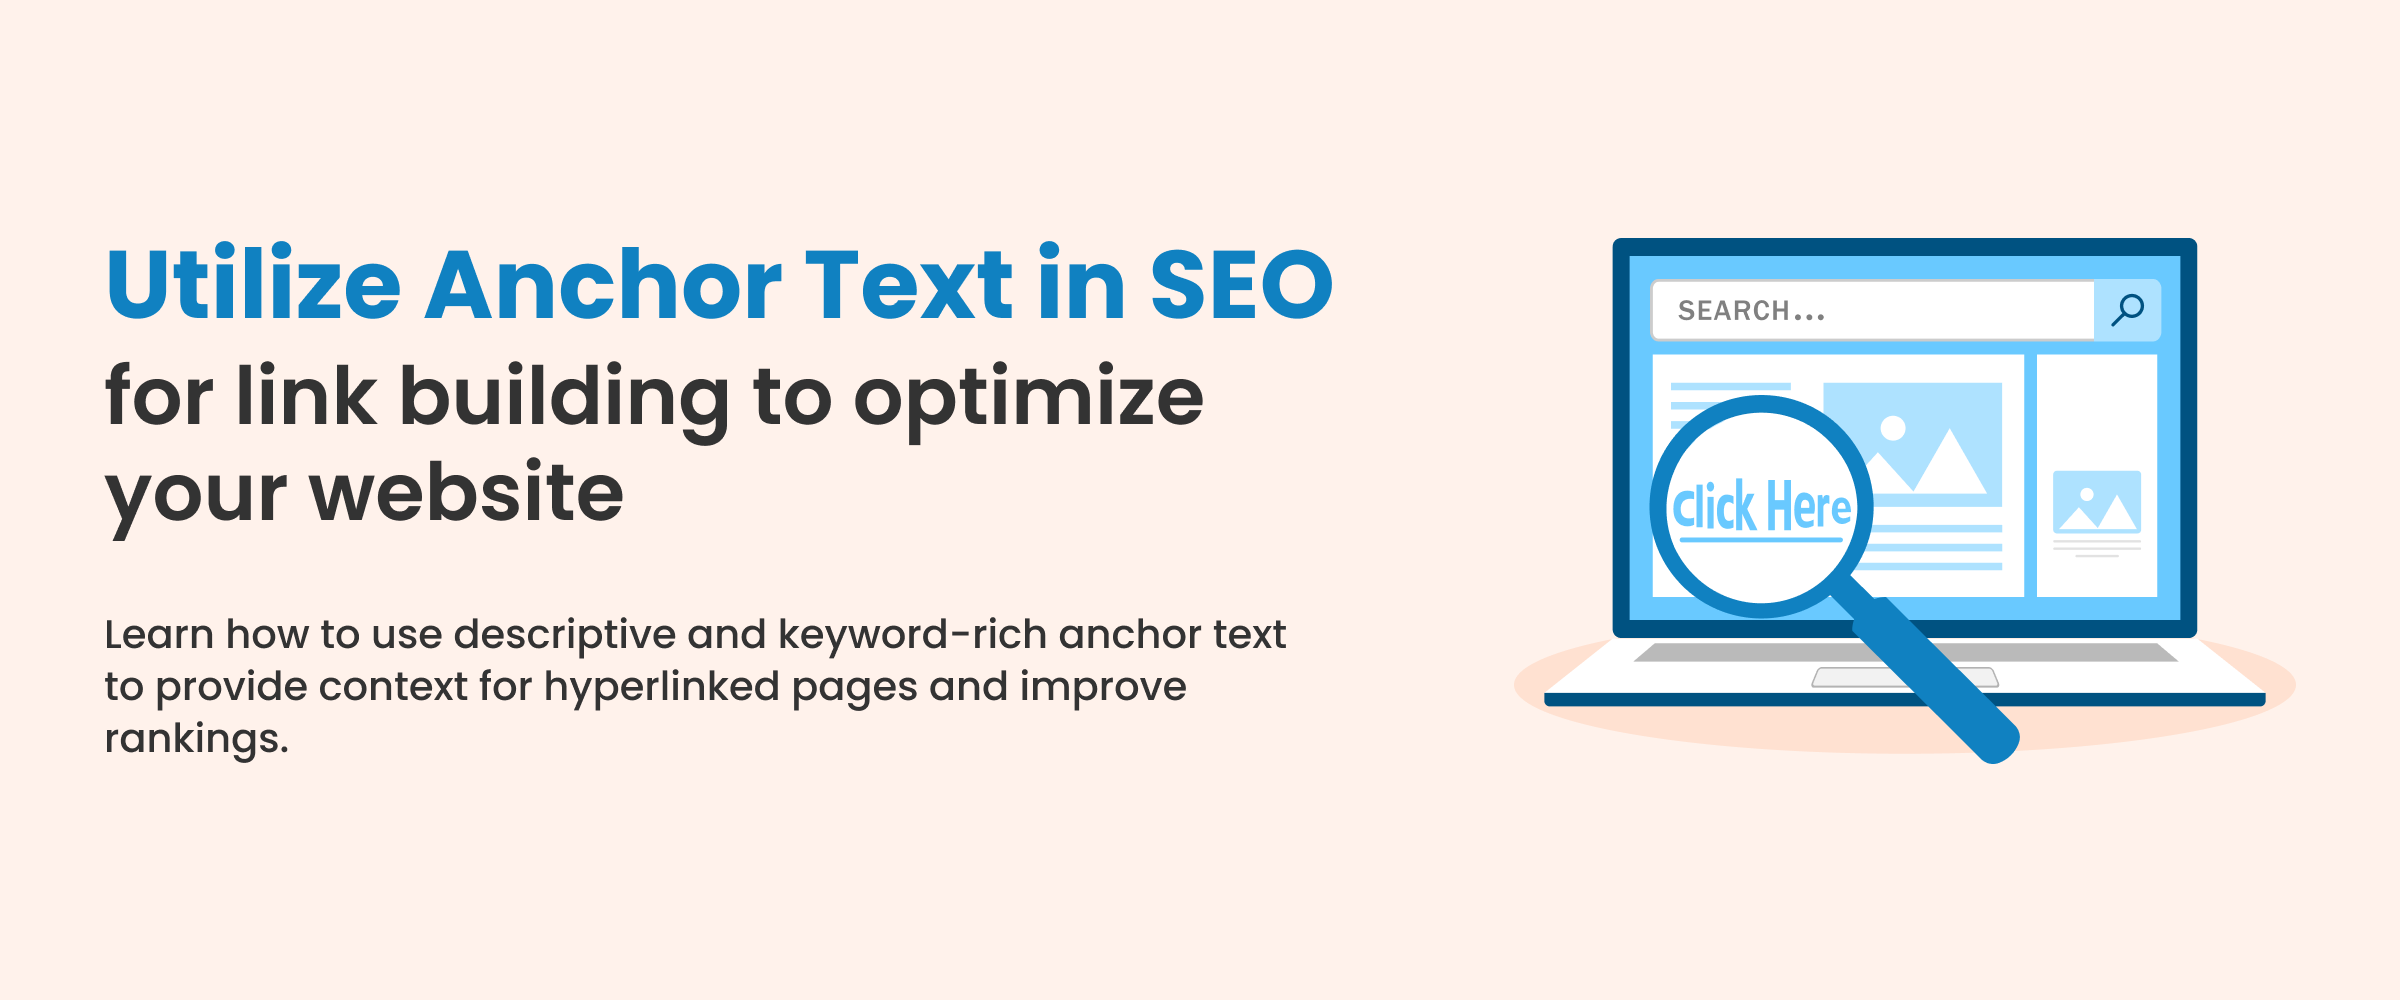 What is Anchor Text in SEO?